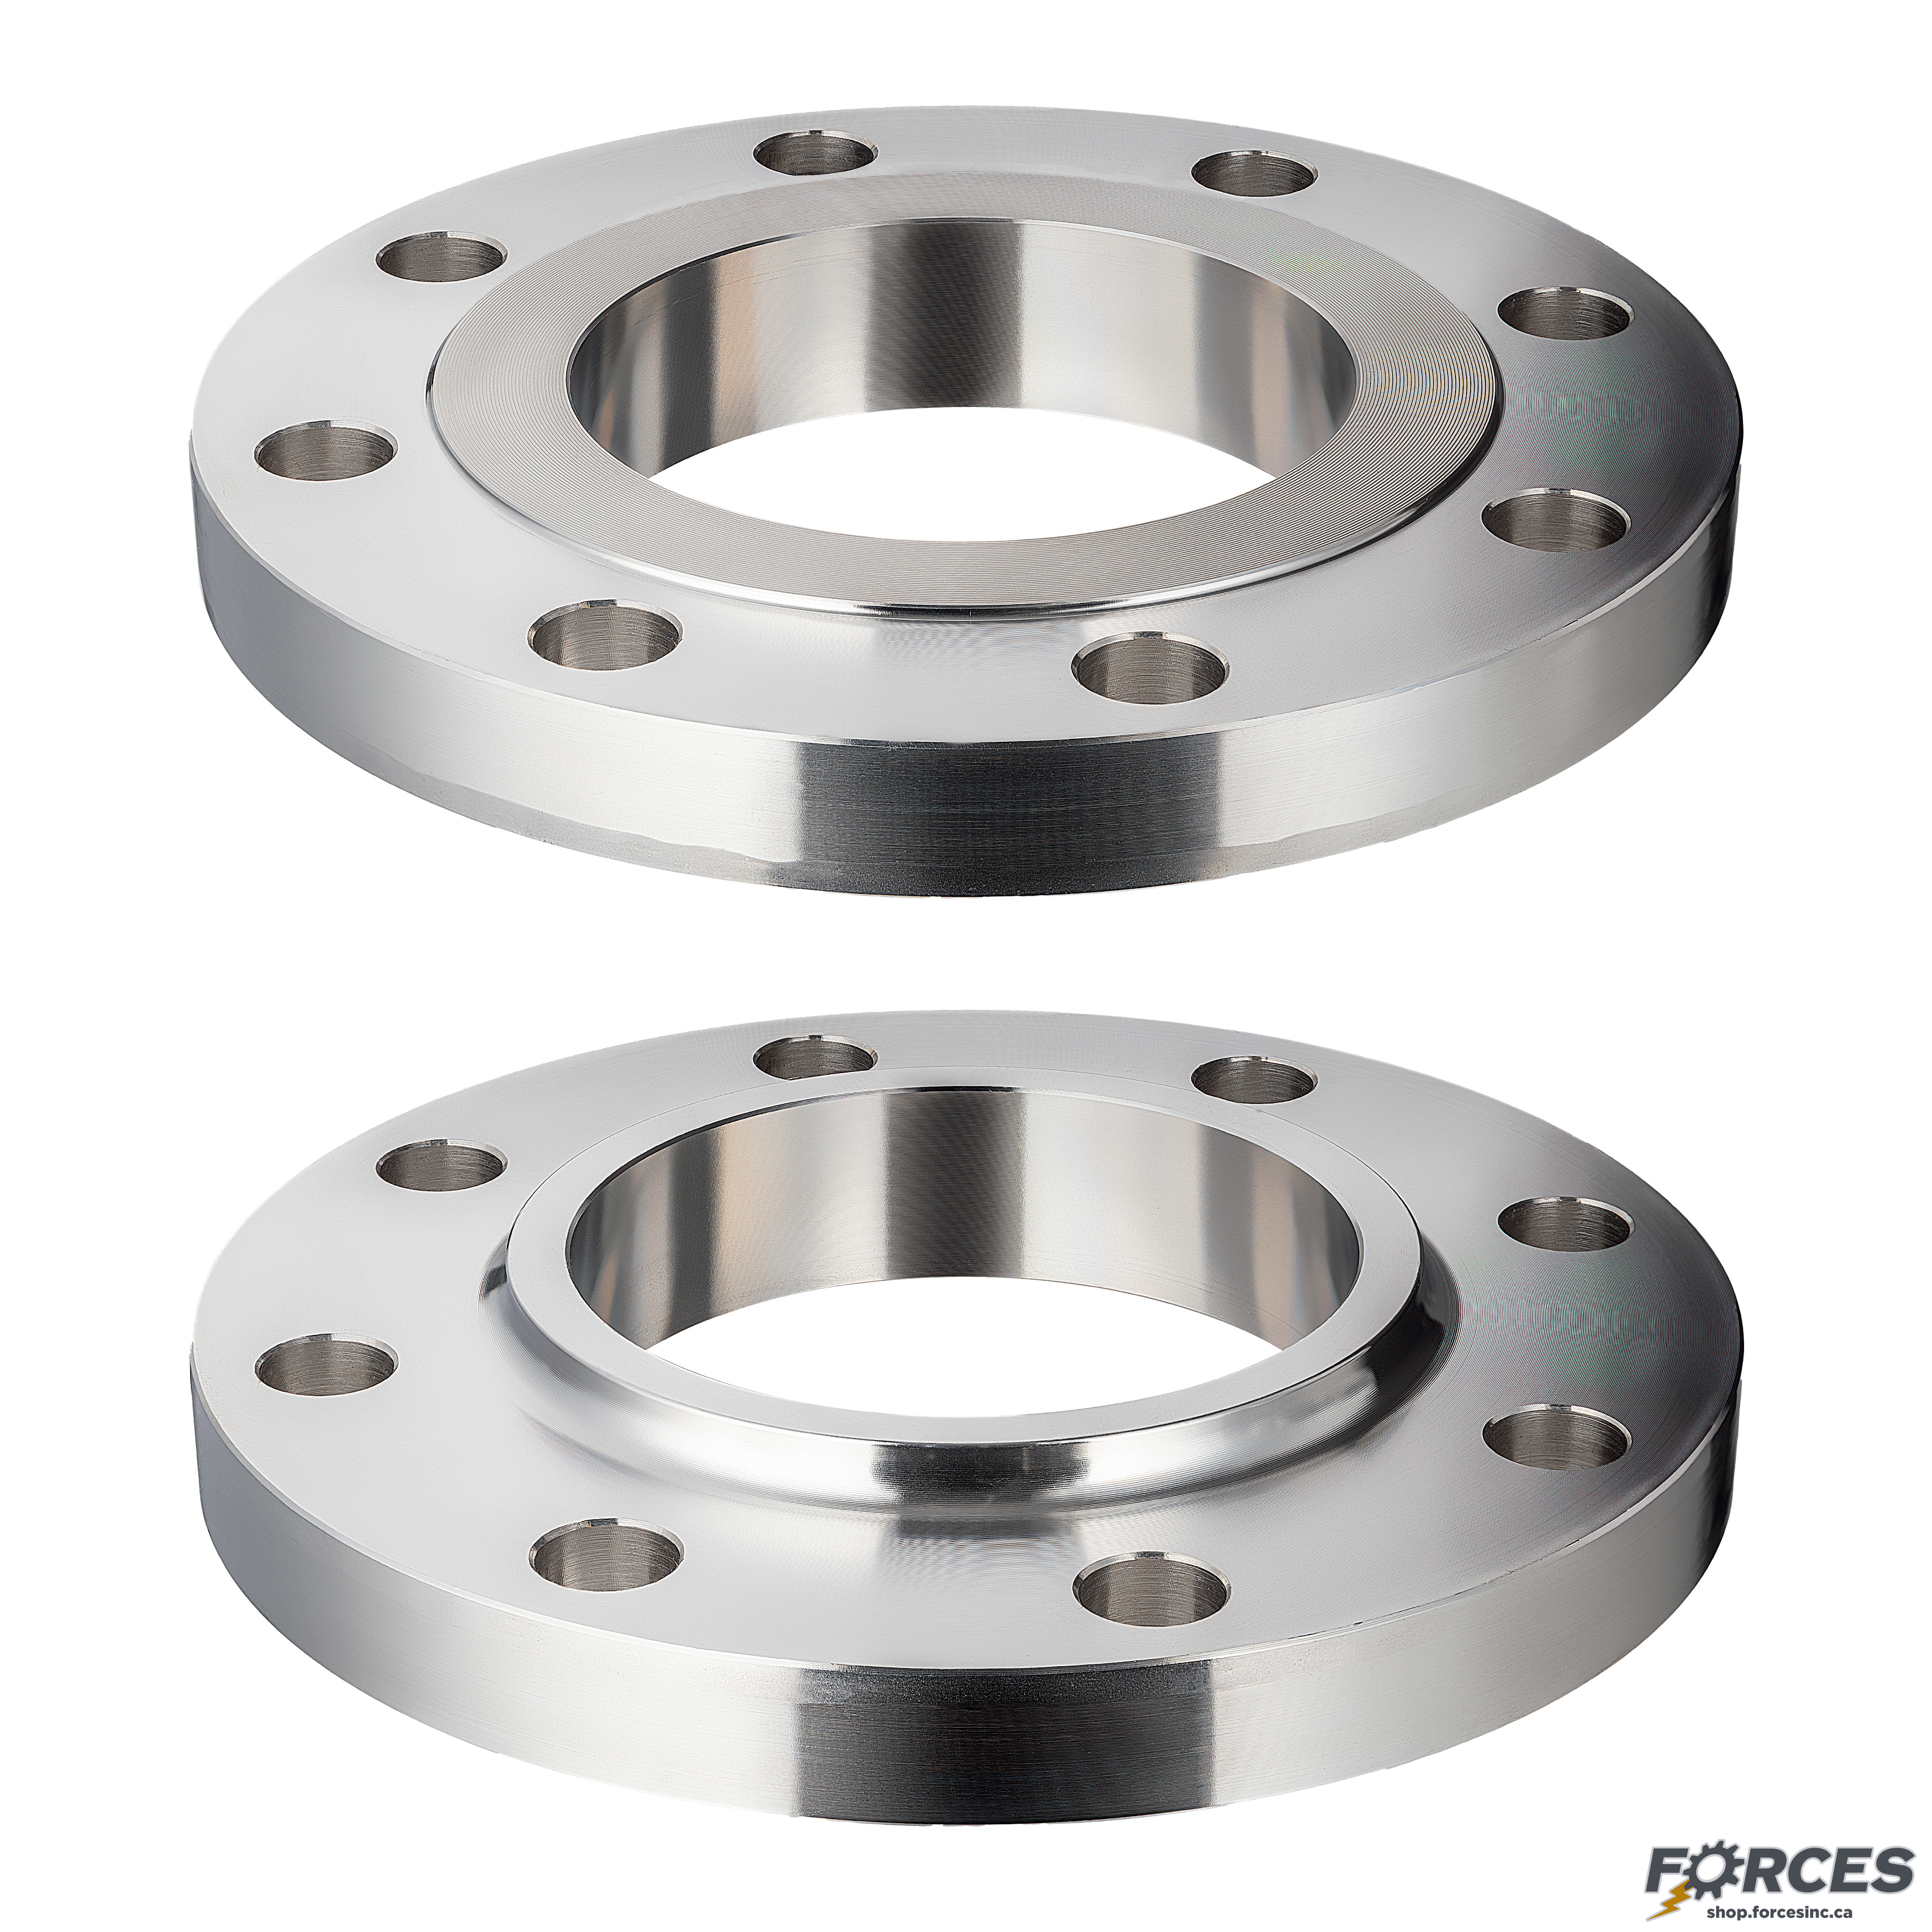 6" Slip-On Flange Class #150 - Stainless Steel 304 - Forces Inc